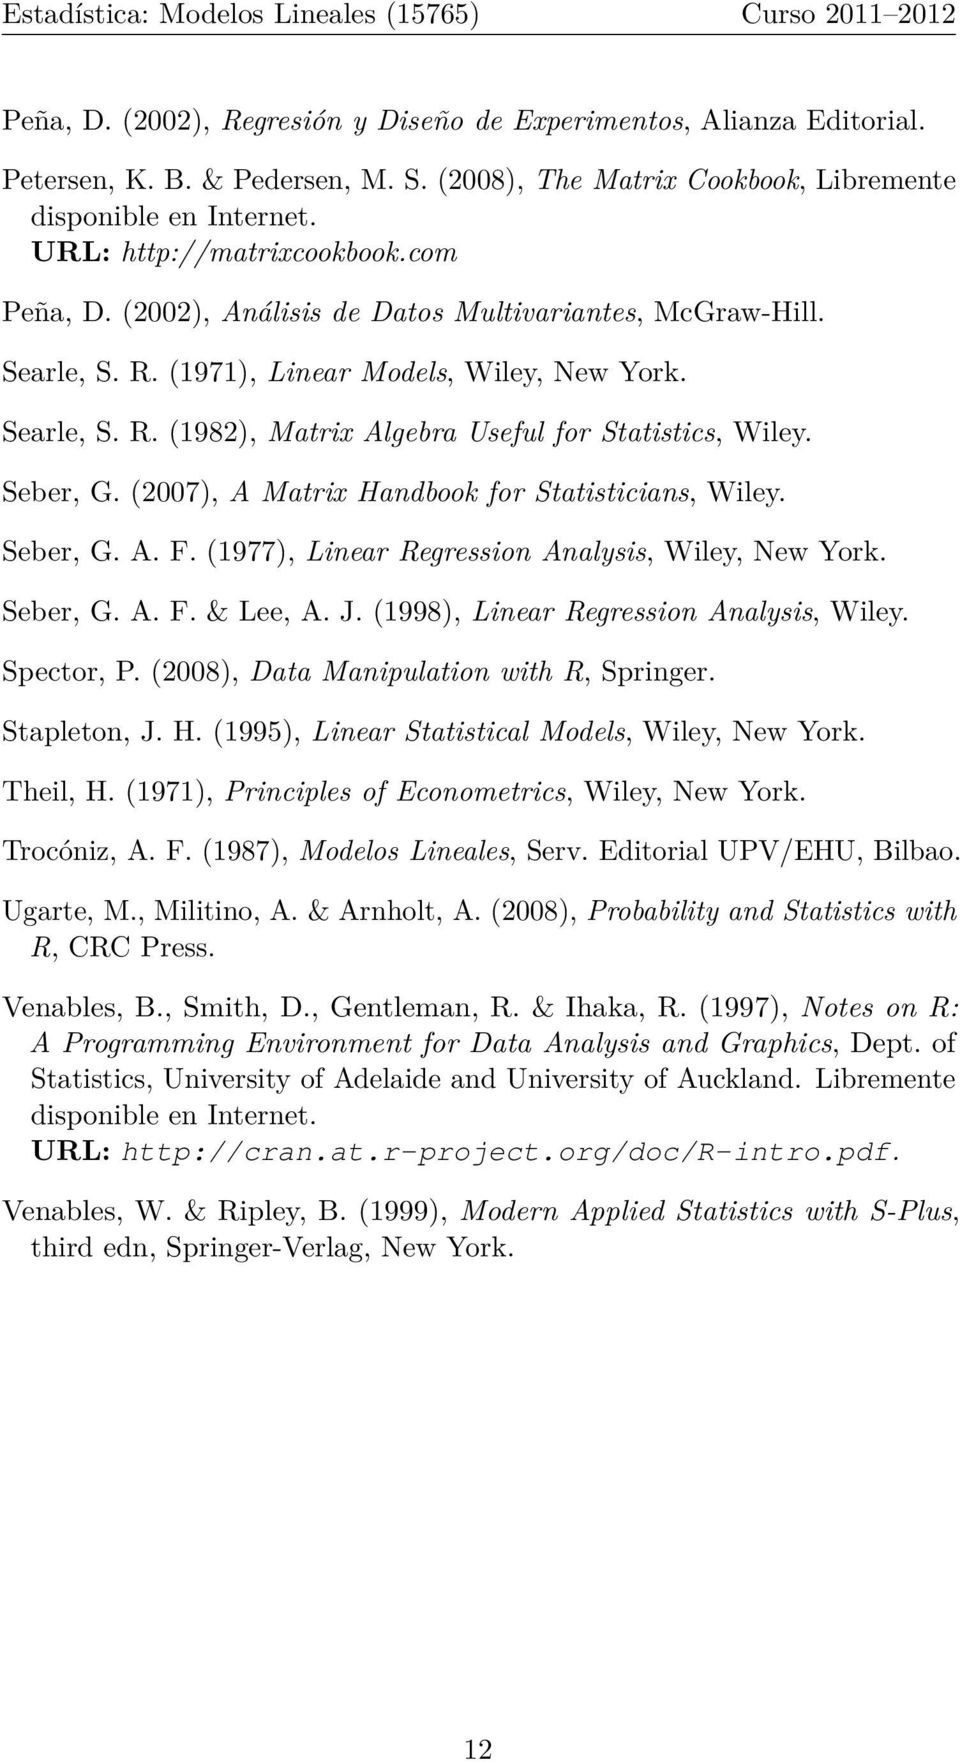 (2007), A Matrix Handbook for Statisticians, Wiley. Seber, G. A. F. (1977), Linear Regression Analysis, Wiley, New York. Seber, G. A. F. & Lee, A. J. (1998), Linear Regression Analysis, Wiley.